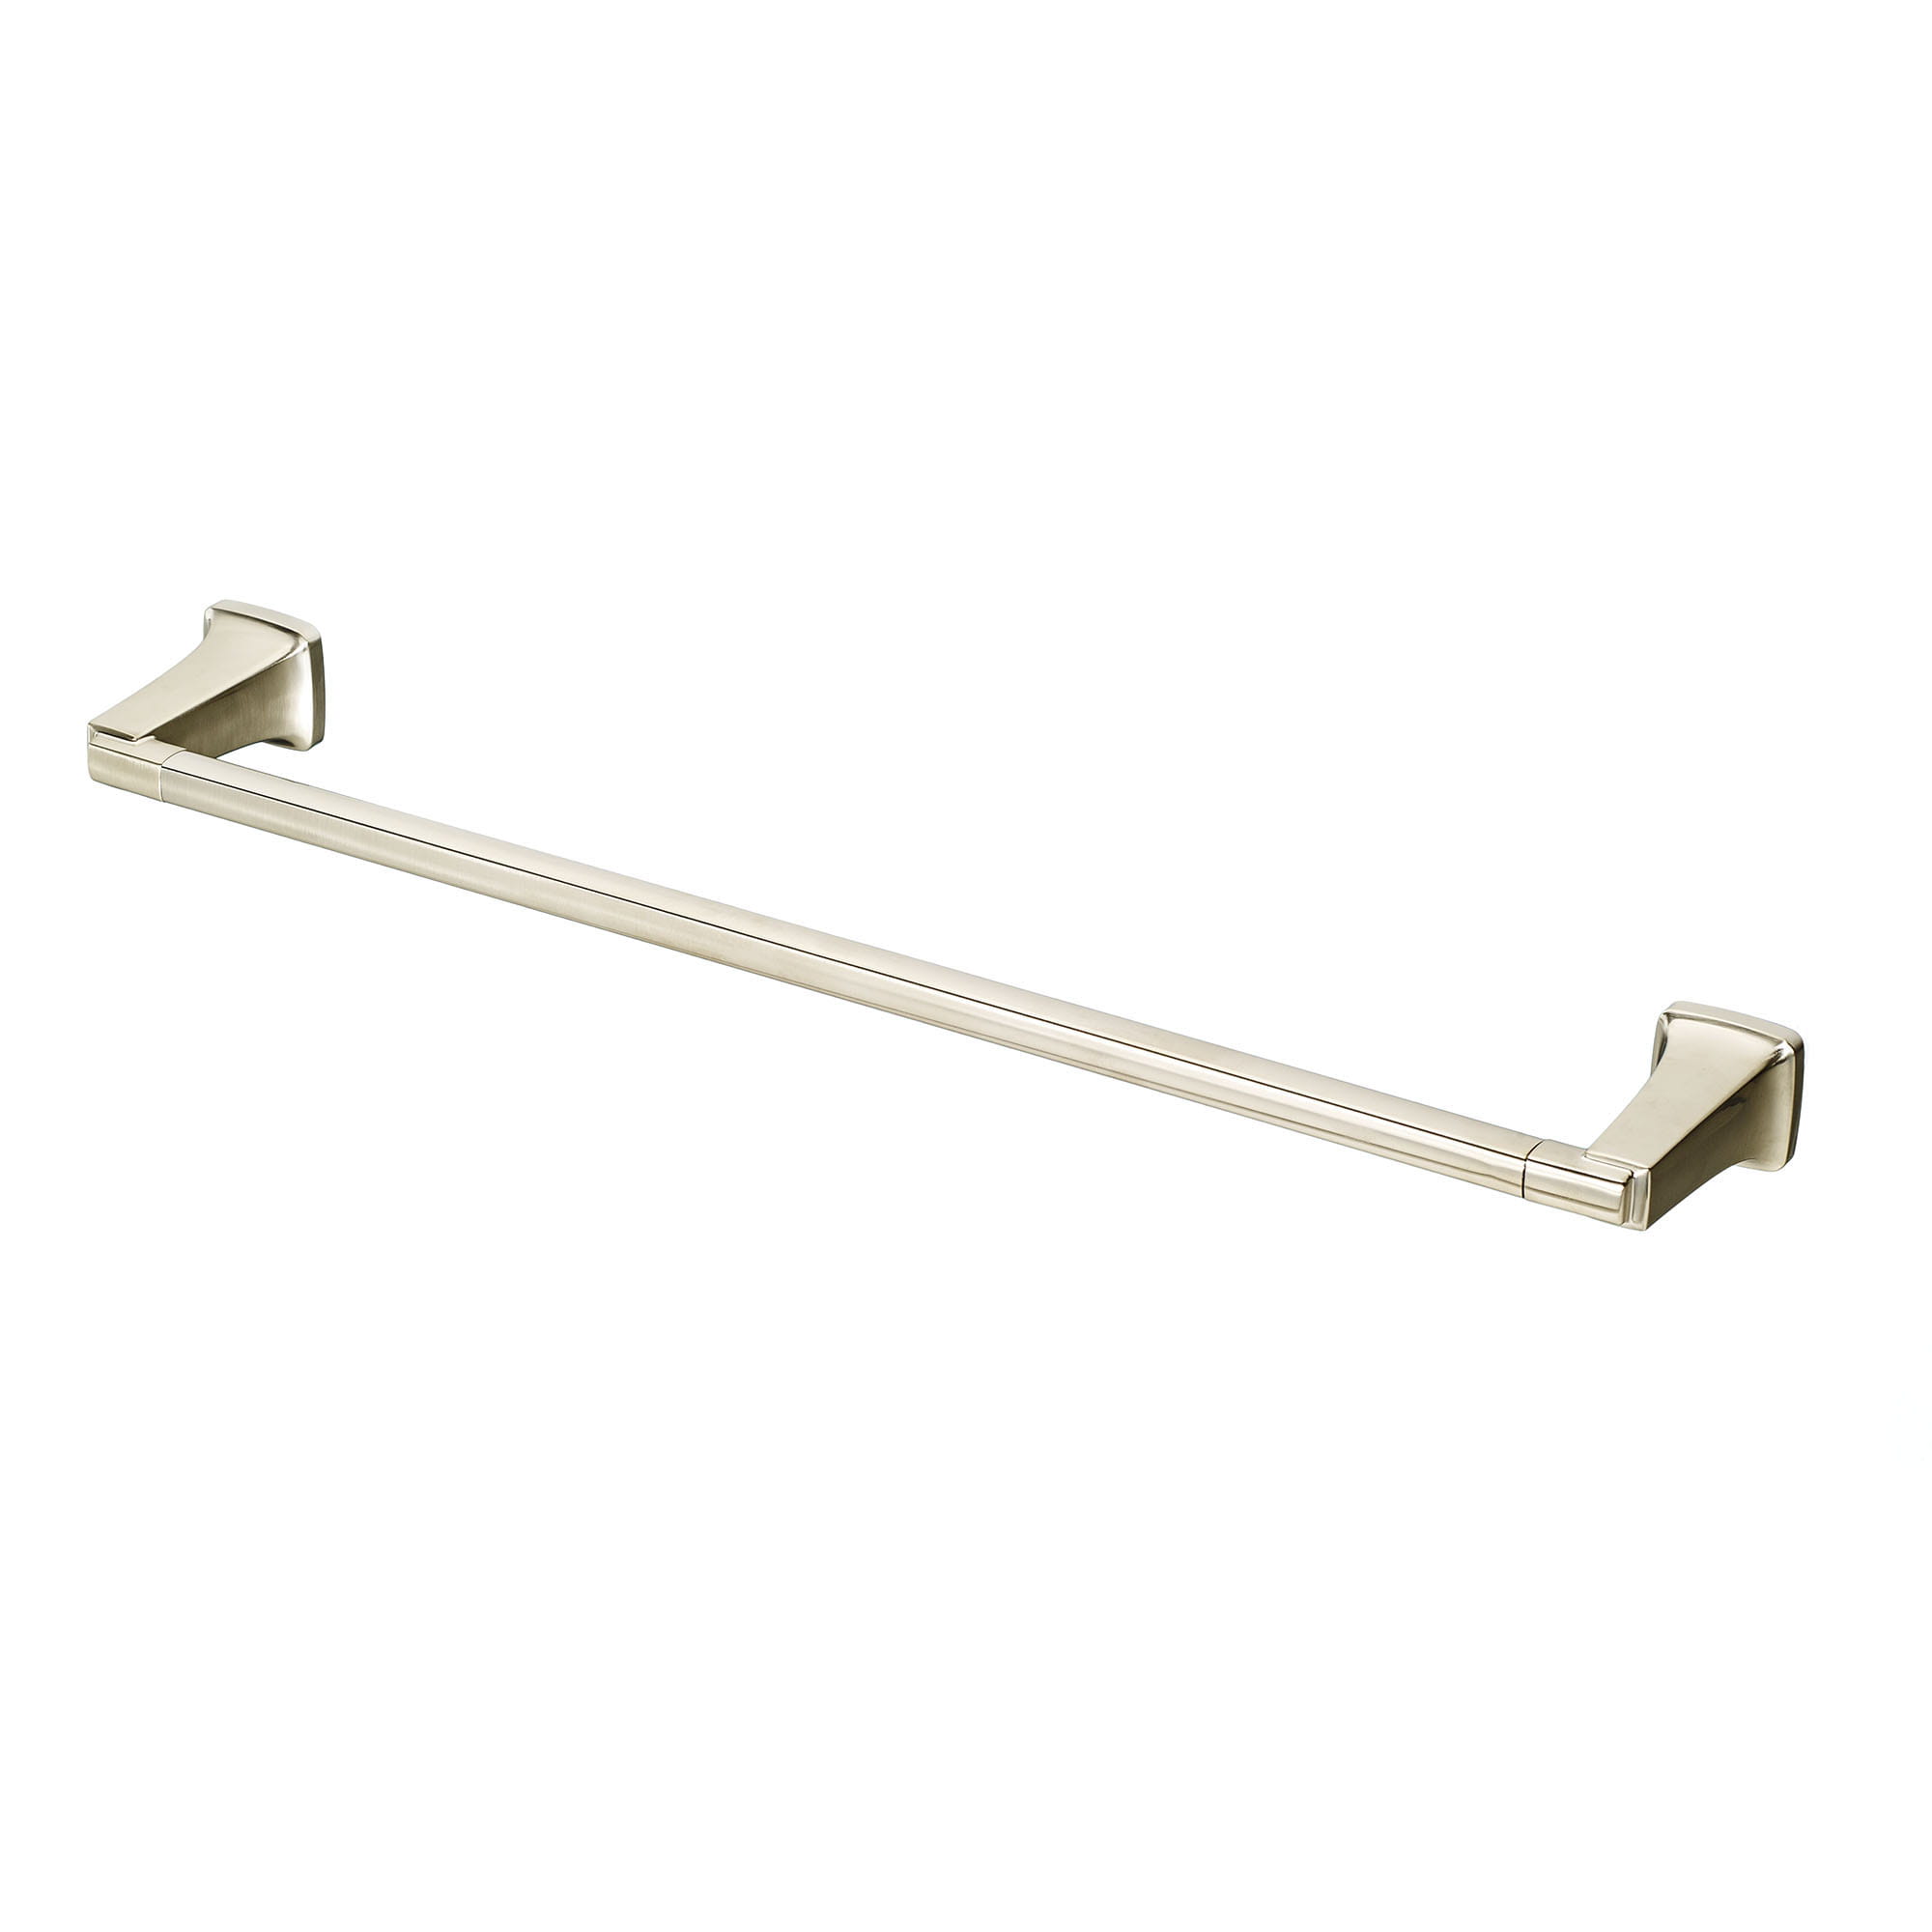 Townsend 24 Inch Towel Bar   BRUSHED NICKEL